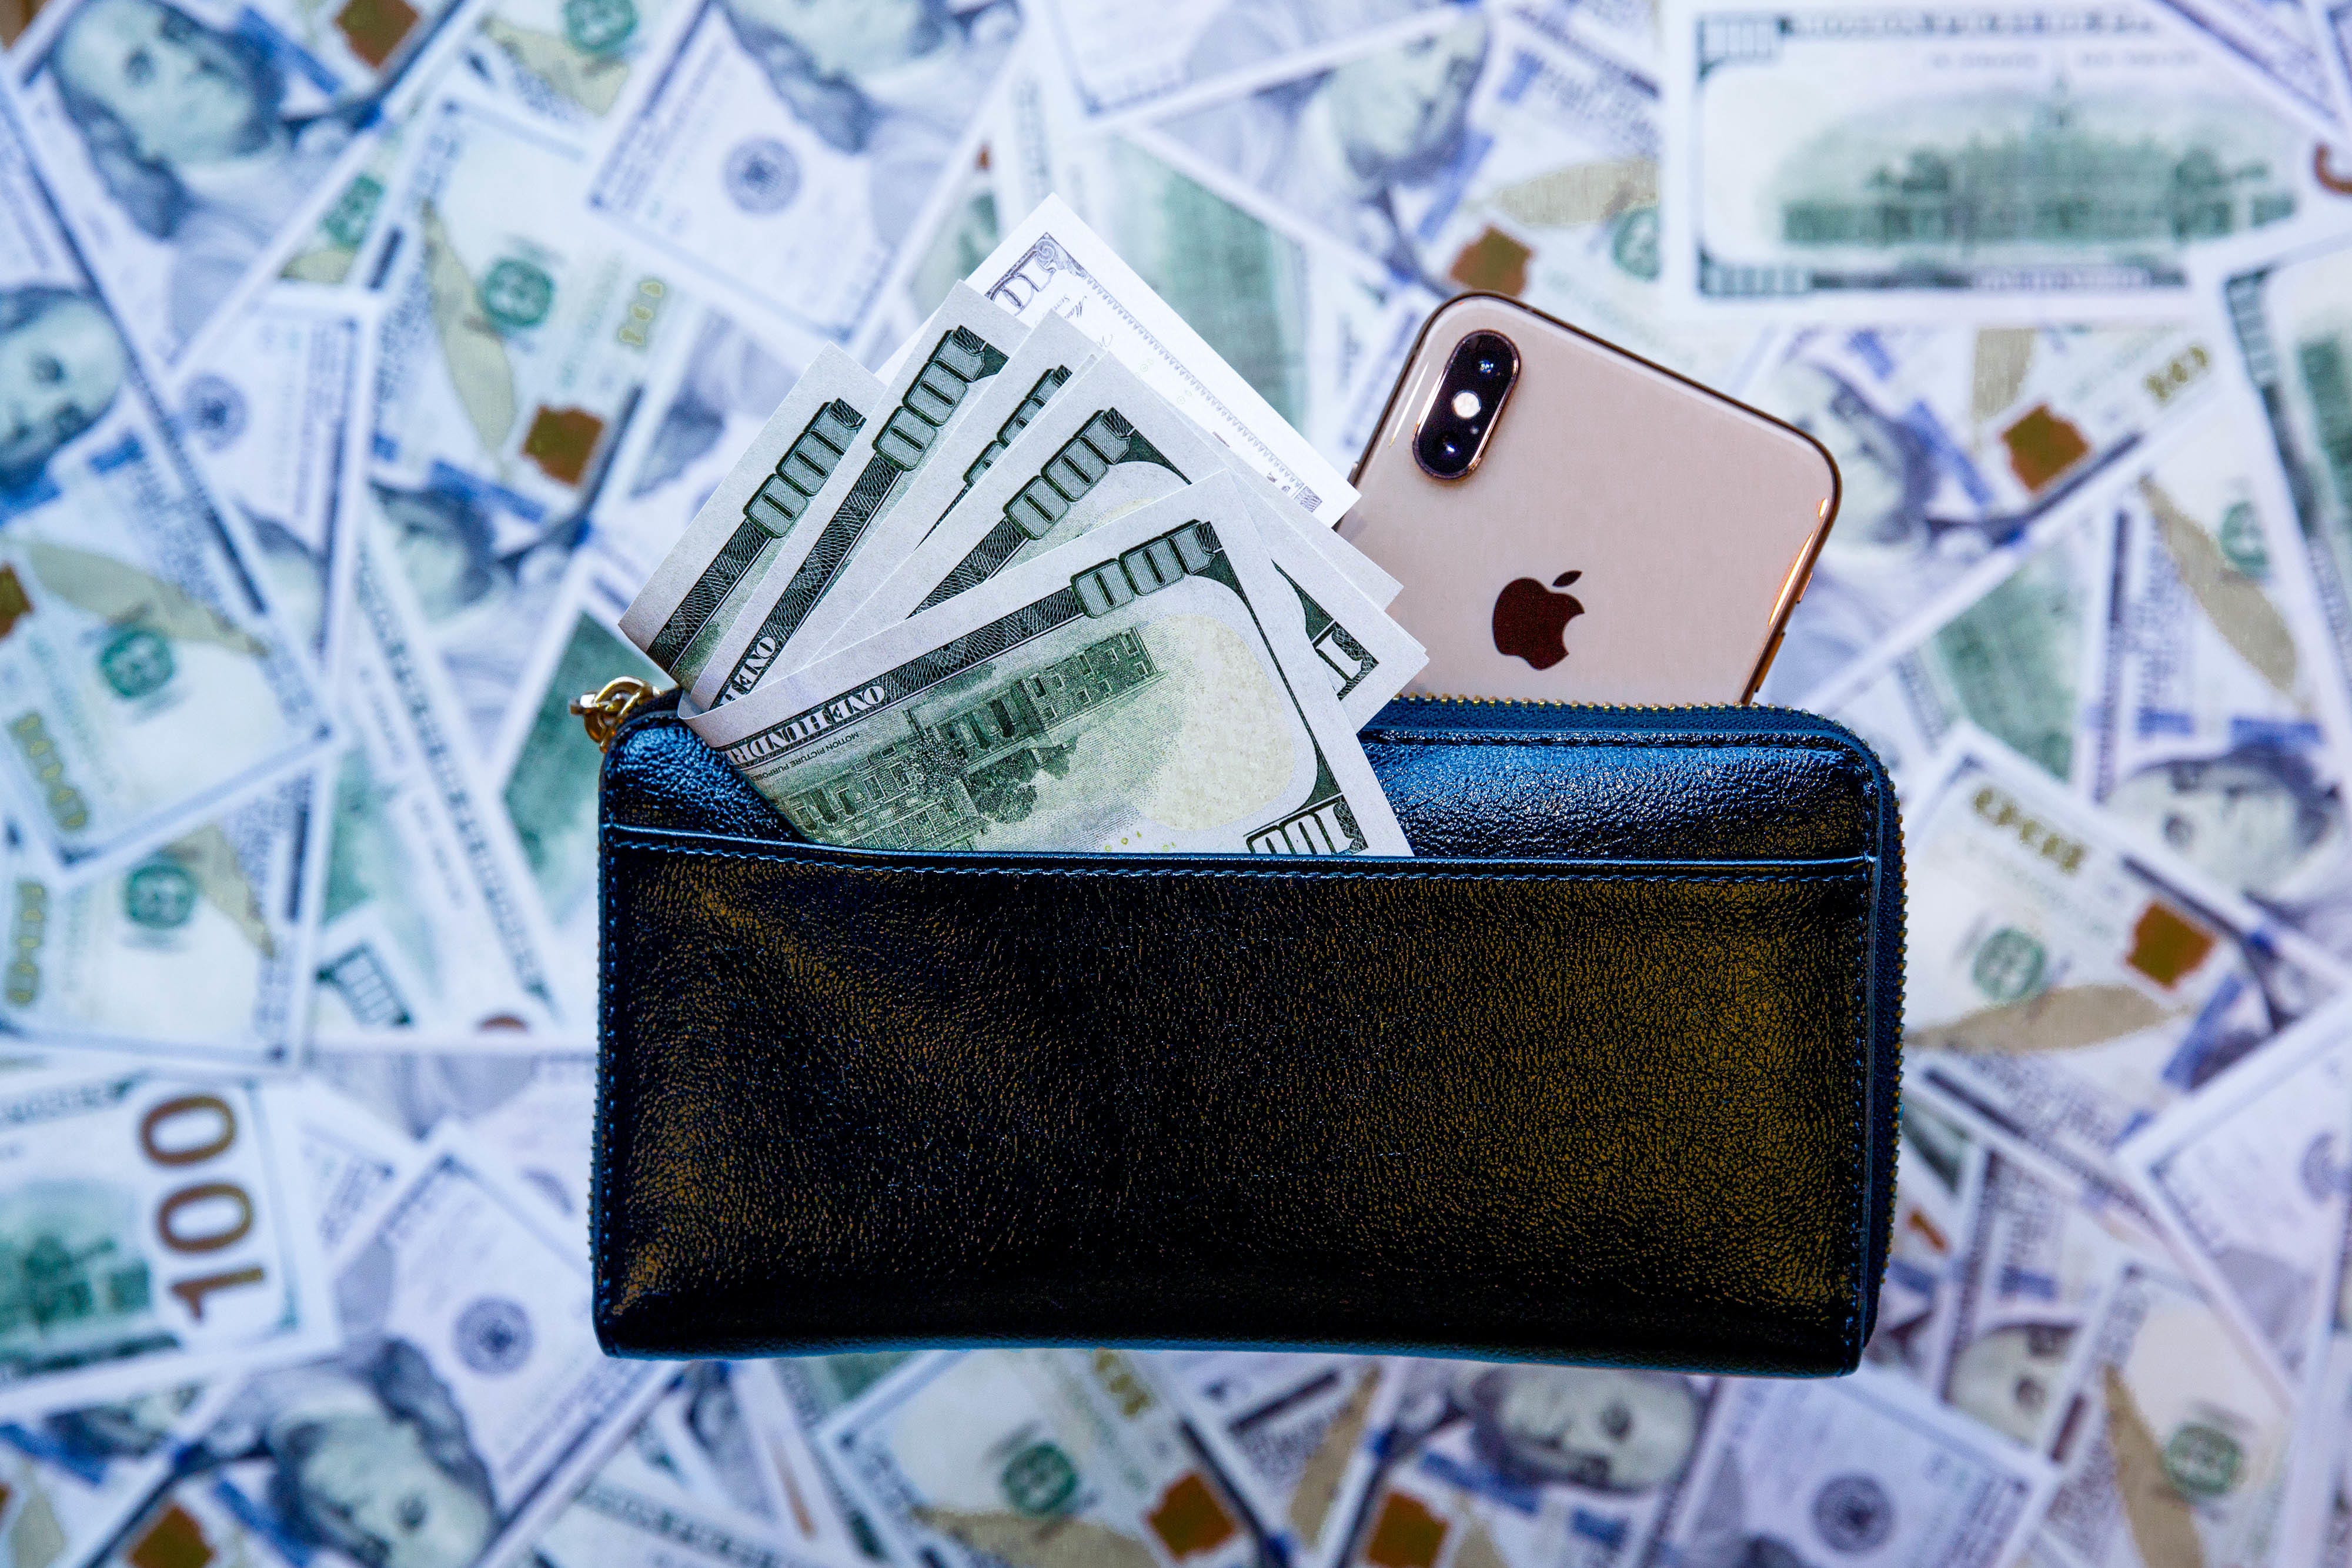 The best ways to sell or trade in your old iPhone for 2021